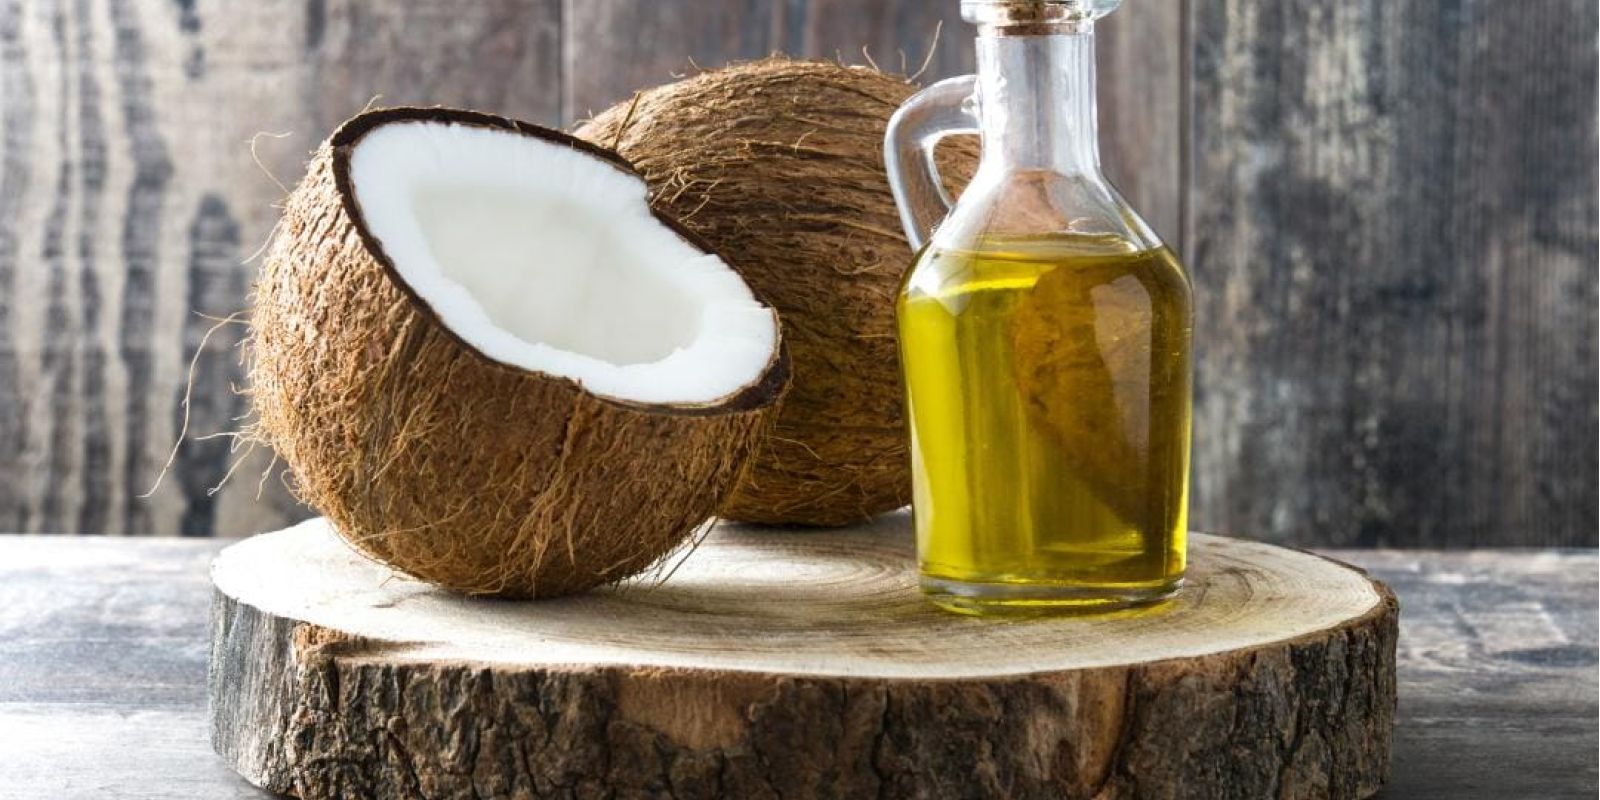 Coconut Oil In Hair Care: Nourish, Repair, and Shine admin ajax.php?action=kernel&p=image&src=%7B%22file%22%3A%22wp content%2Fuploads%2F2023%2F05%2FWhatsApp Image 2023 05 25 at 10.44.56